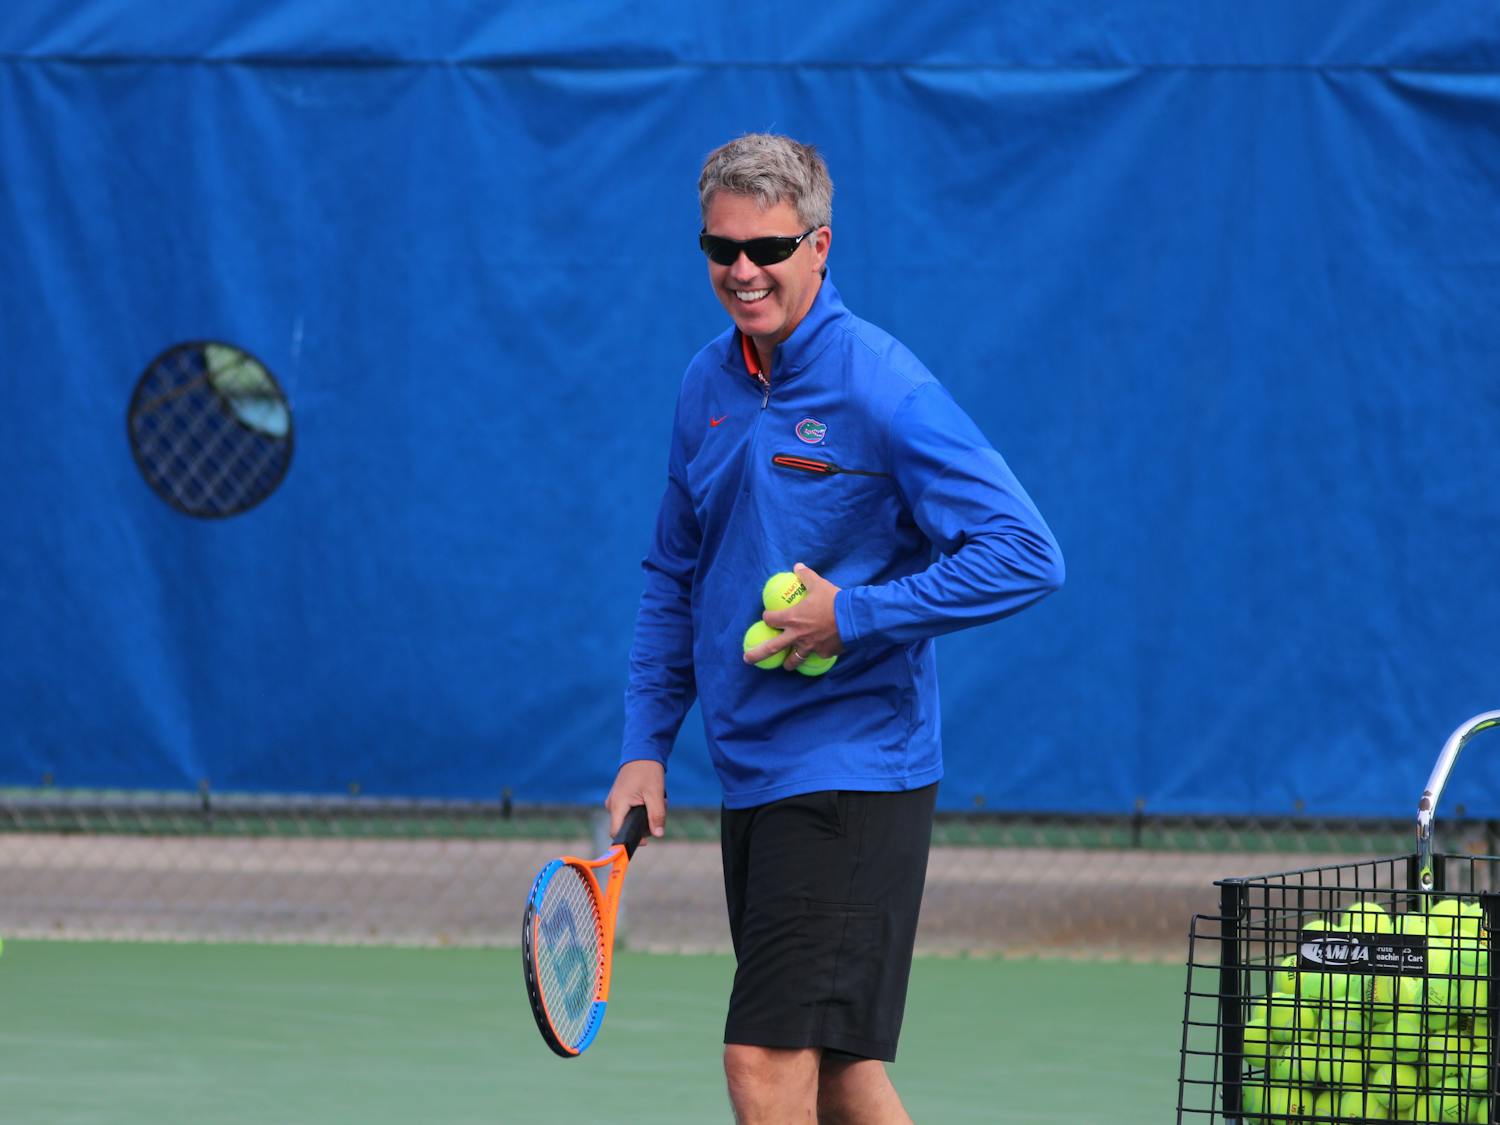 UF women's tennis coach Roland Thornqvist is from Sweden and said that being from outside the U.S. helps him recruit international talent. “I think that I understand what (international players) are going through when they get here,” he said. 